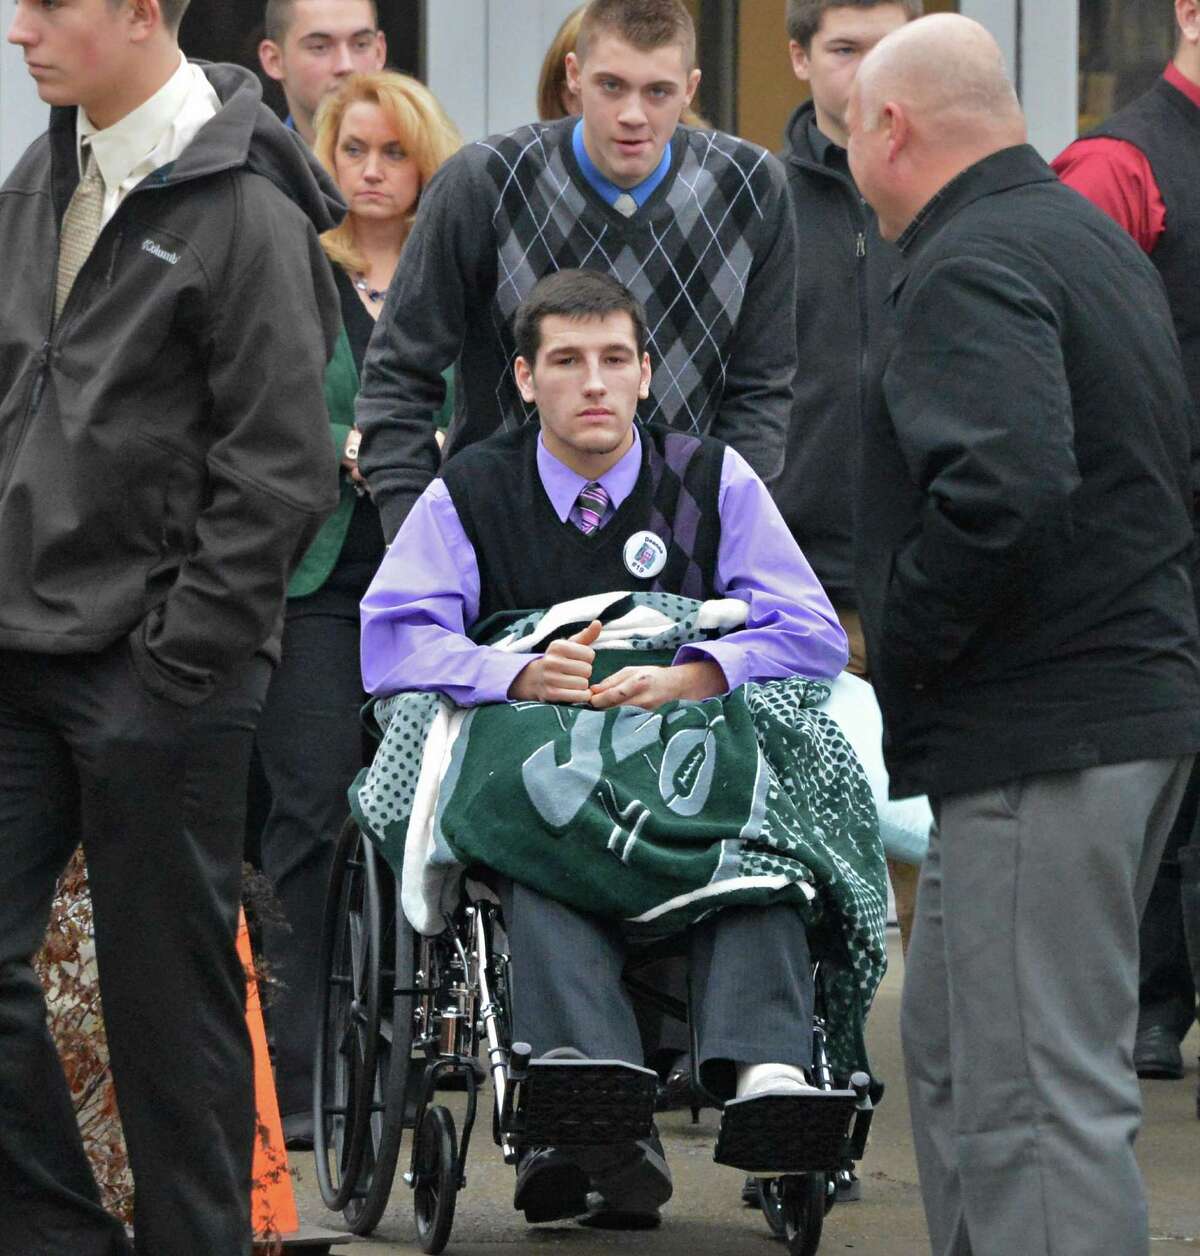 Shen student Matt Hardy center, leaves Corpus Christi Church in Round Lake Saturday Dec. 8, 2012, following funeral services for Chris Stewart, the 17-year-old Shenendehowa student who died along with classmate Deanna Rivers in a crash on the Northway that left two other teens injured. Hardy was one of the teens seriously injured in the crash. (John Carl D'Annibale / Times Union)